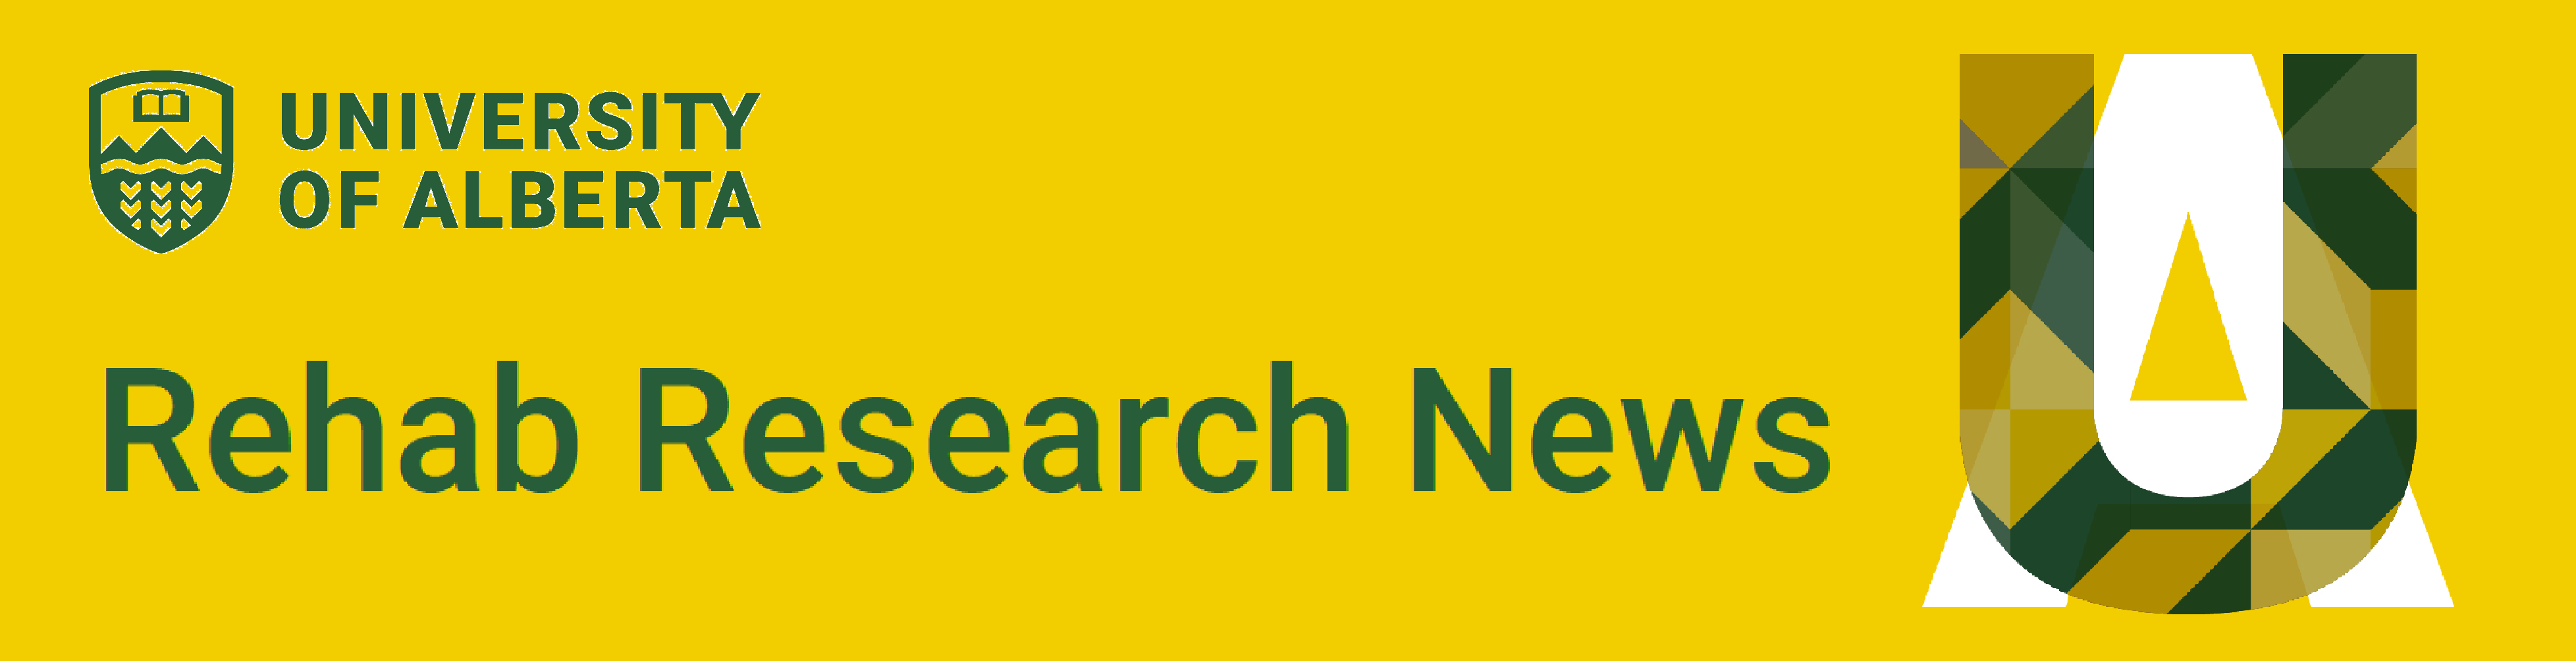 research-news-website-banner.png